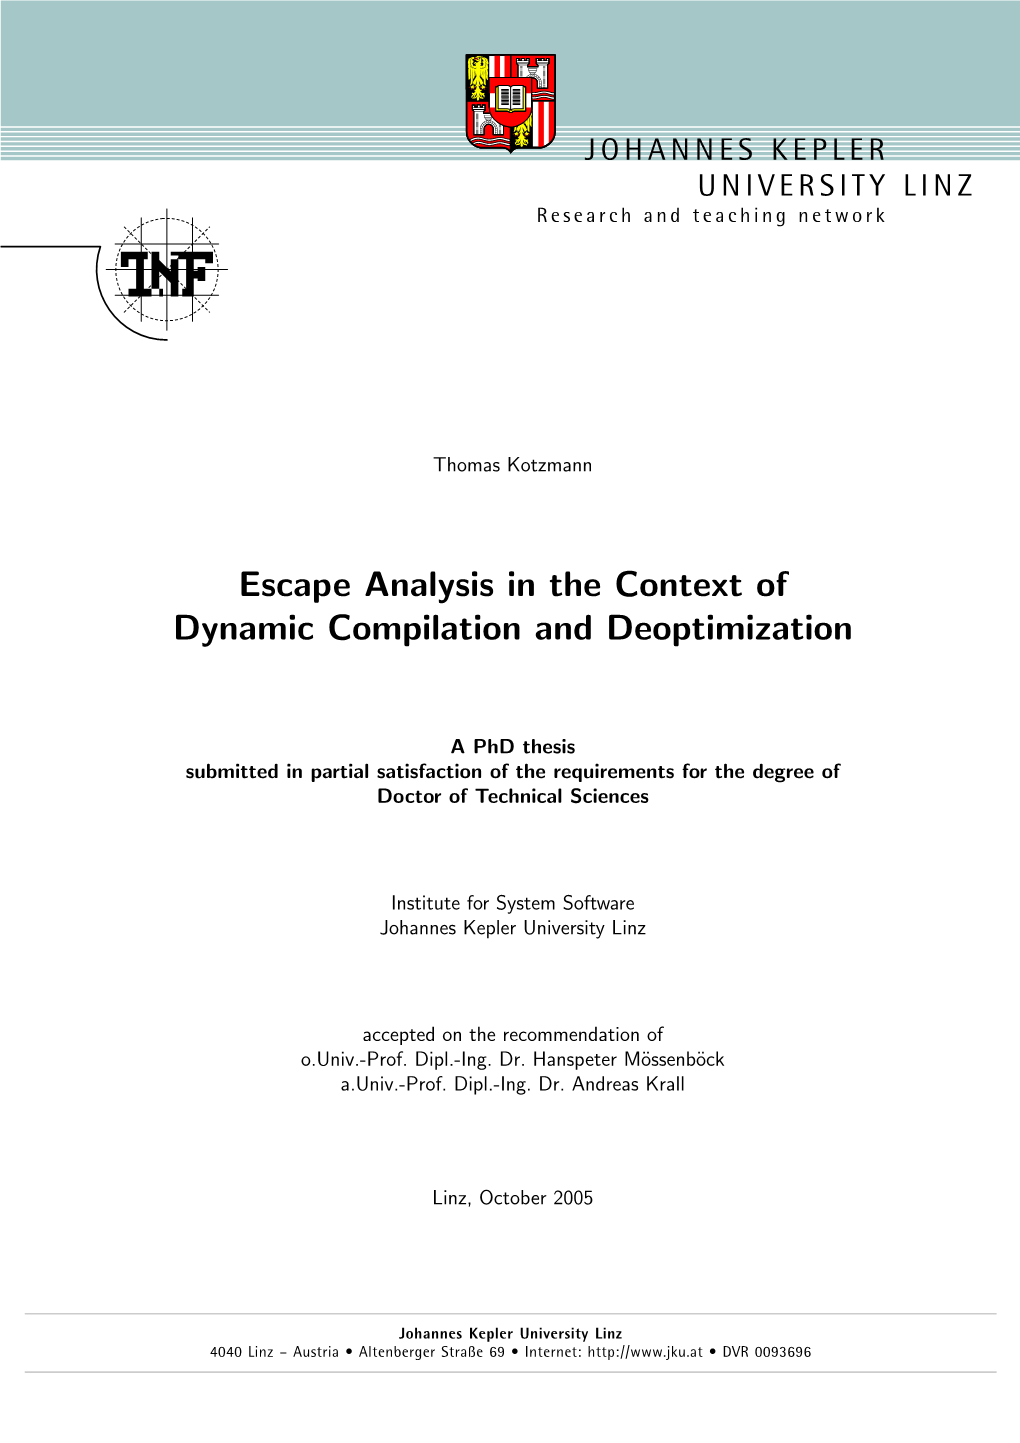 Escape Analysis in the Context of Dynamic Compilation and Deoptimization